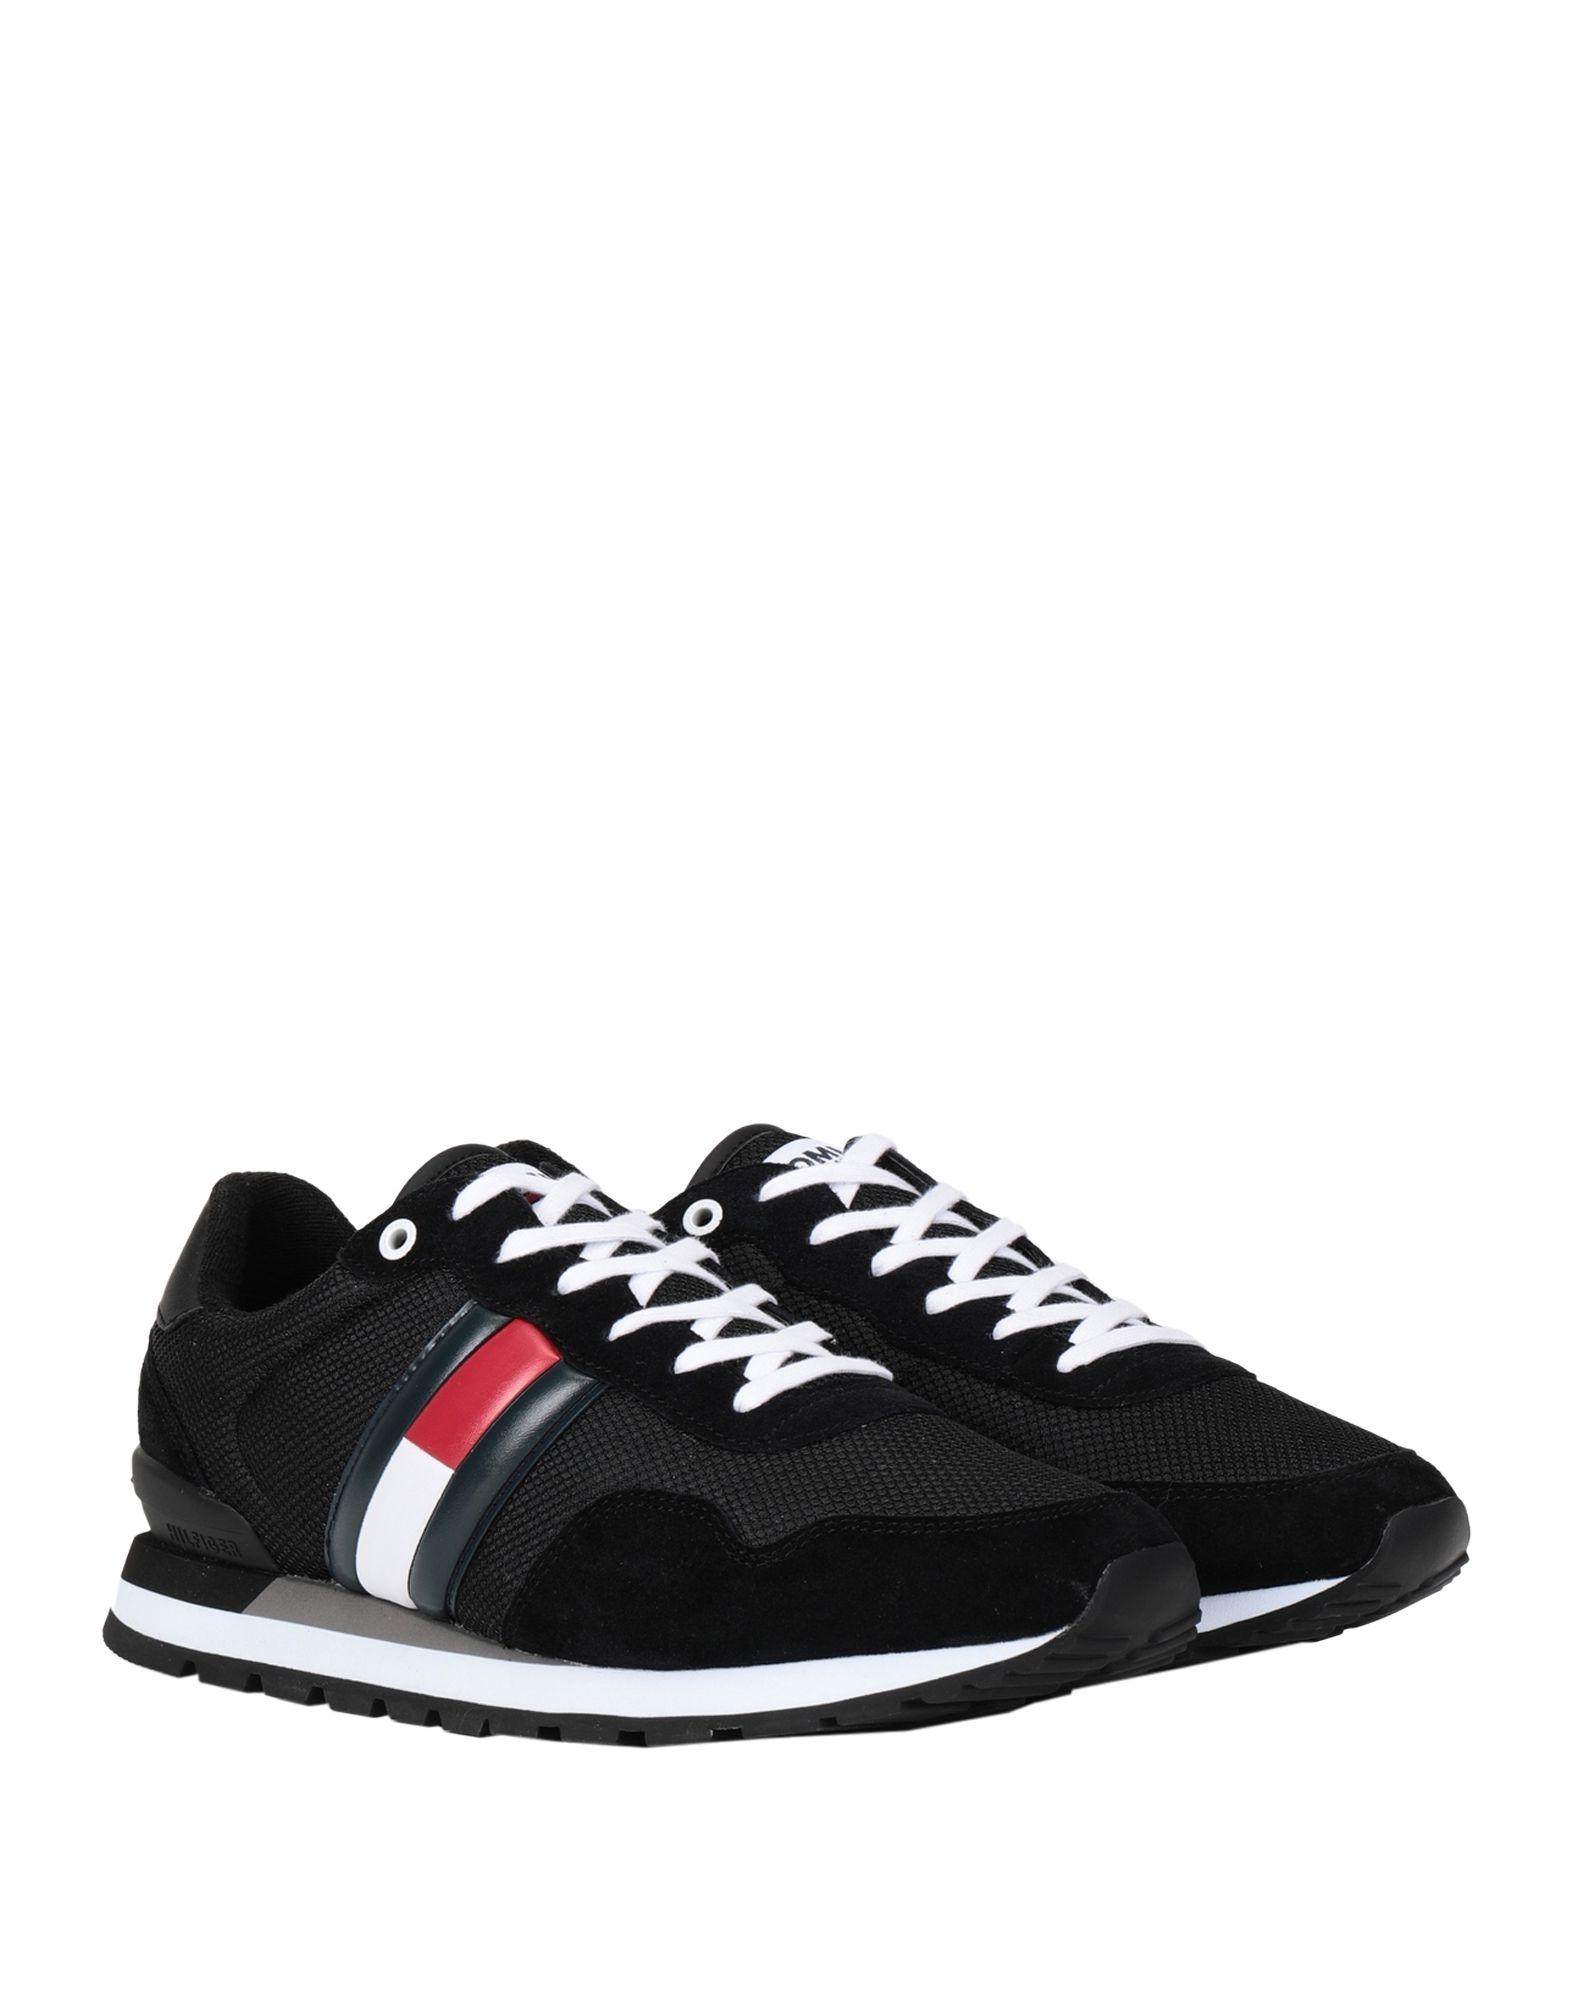 Tommy Hilfiger Synthetic Low-tops & Sneakers in Black for Men - Lyst